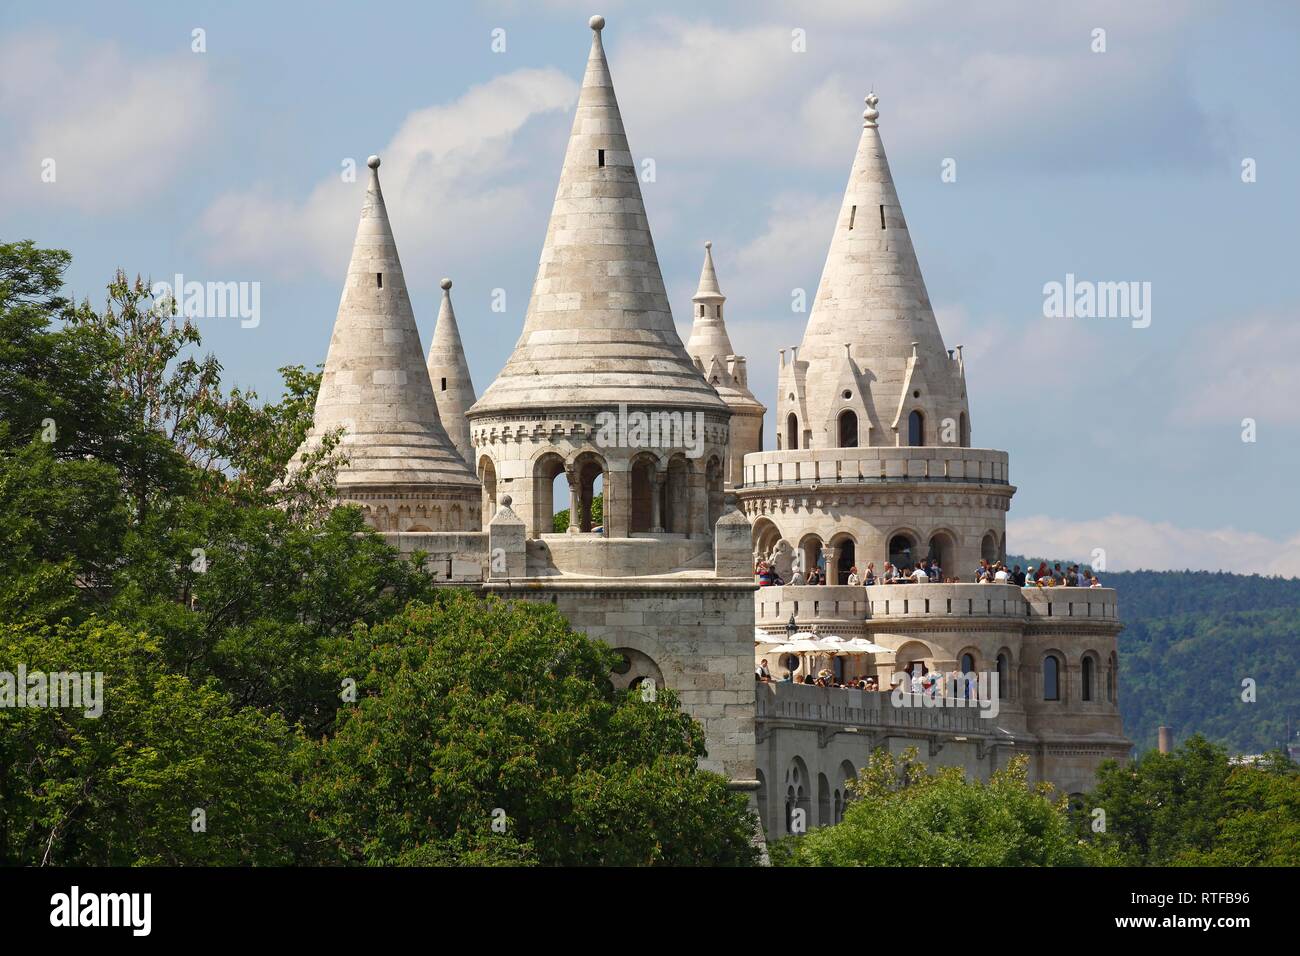 Fisherman's Bastion at castle hill, Castle district, Buda district, Budapest, Hungary Stock Photo